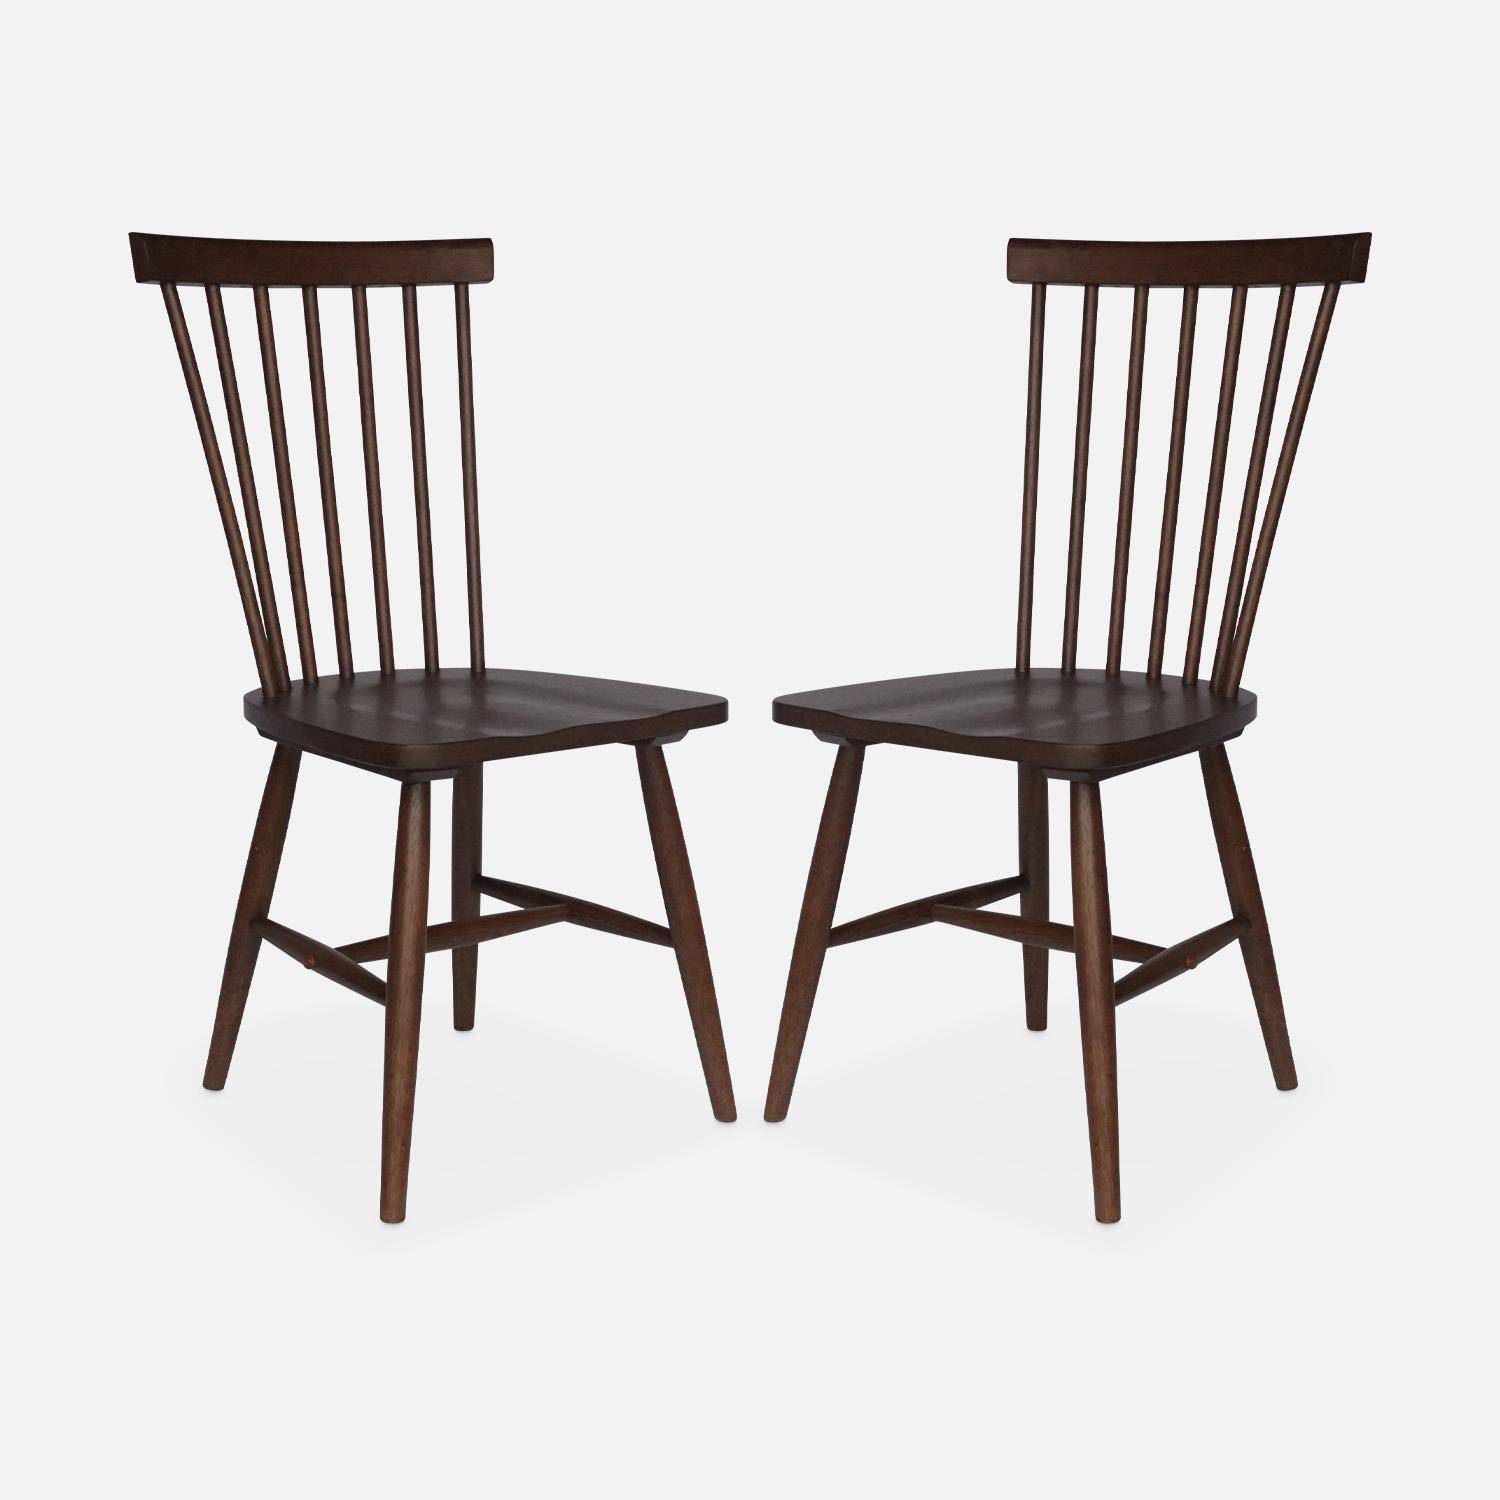 Pair of dining room chairs in Hevea wood,  L49 x W44 x H90 cm, Dark wood Photo5